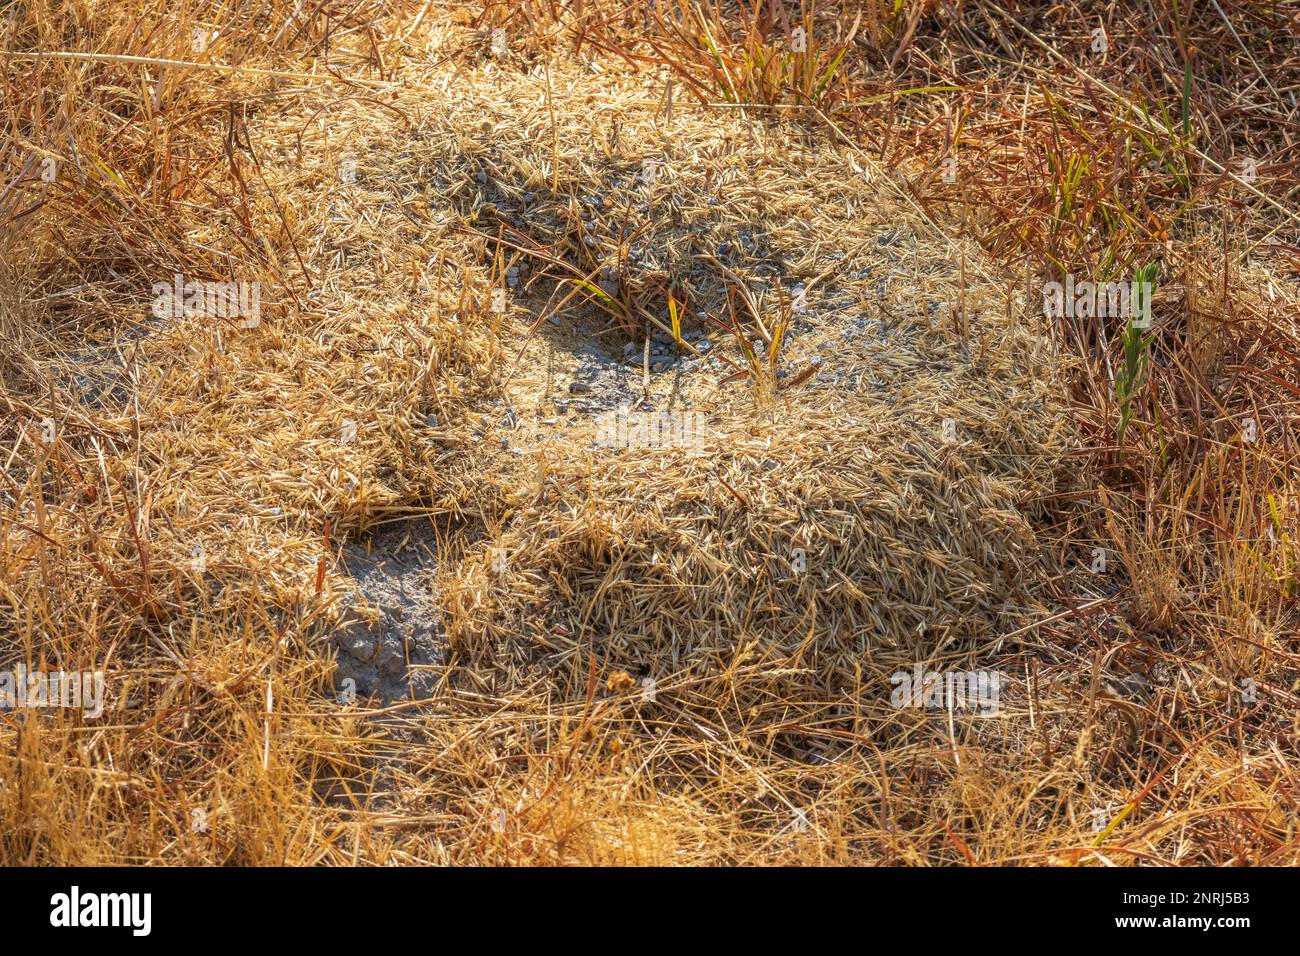 Messor, Smooth Harvester Ant Discarded Seed husk Stock Photo